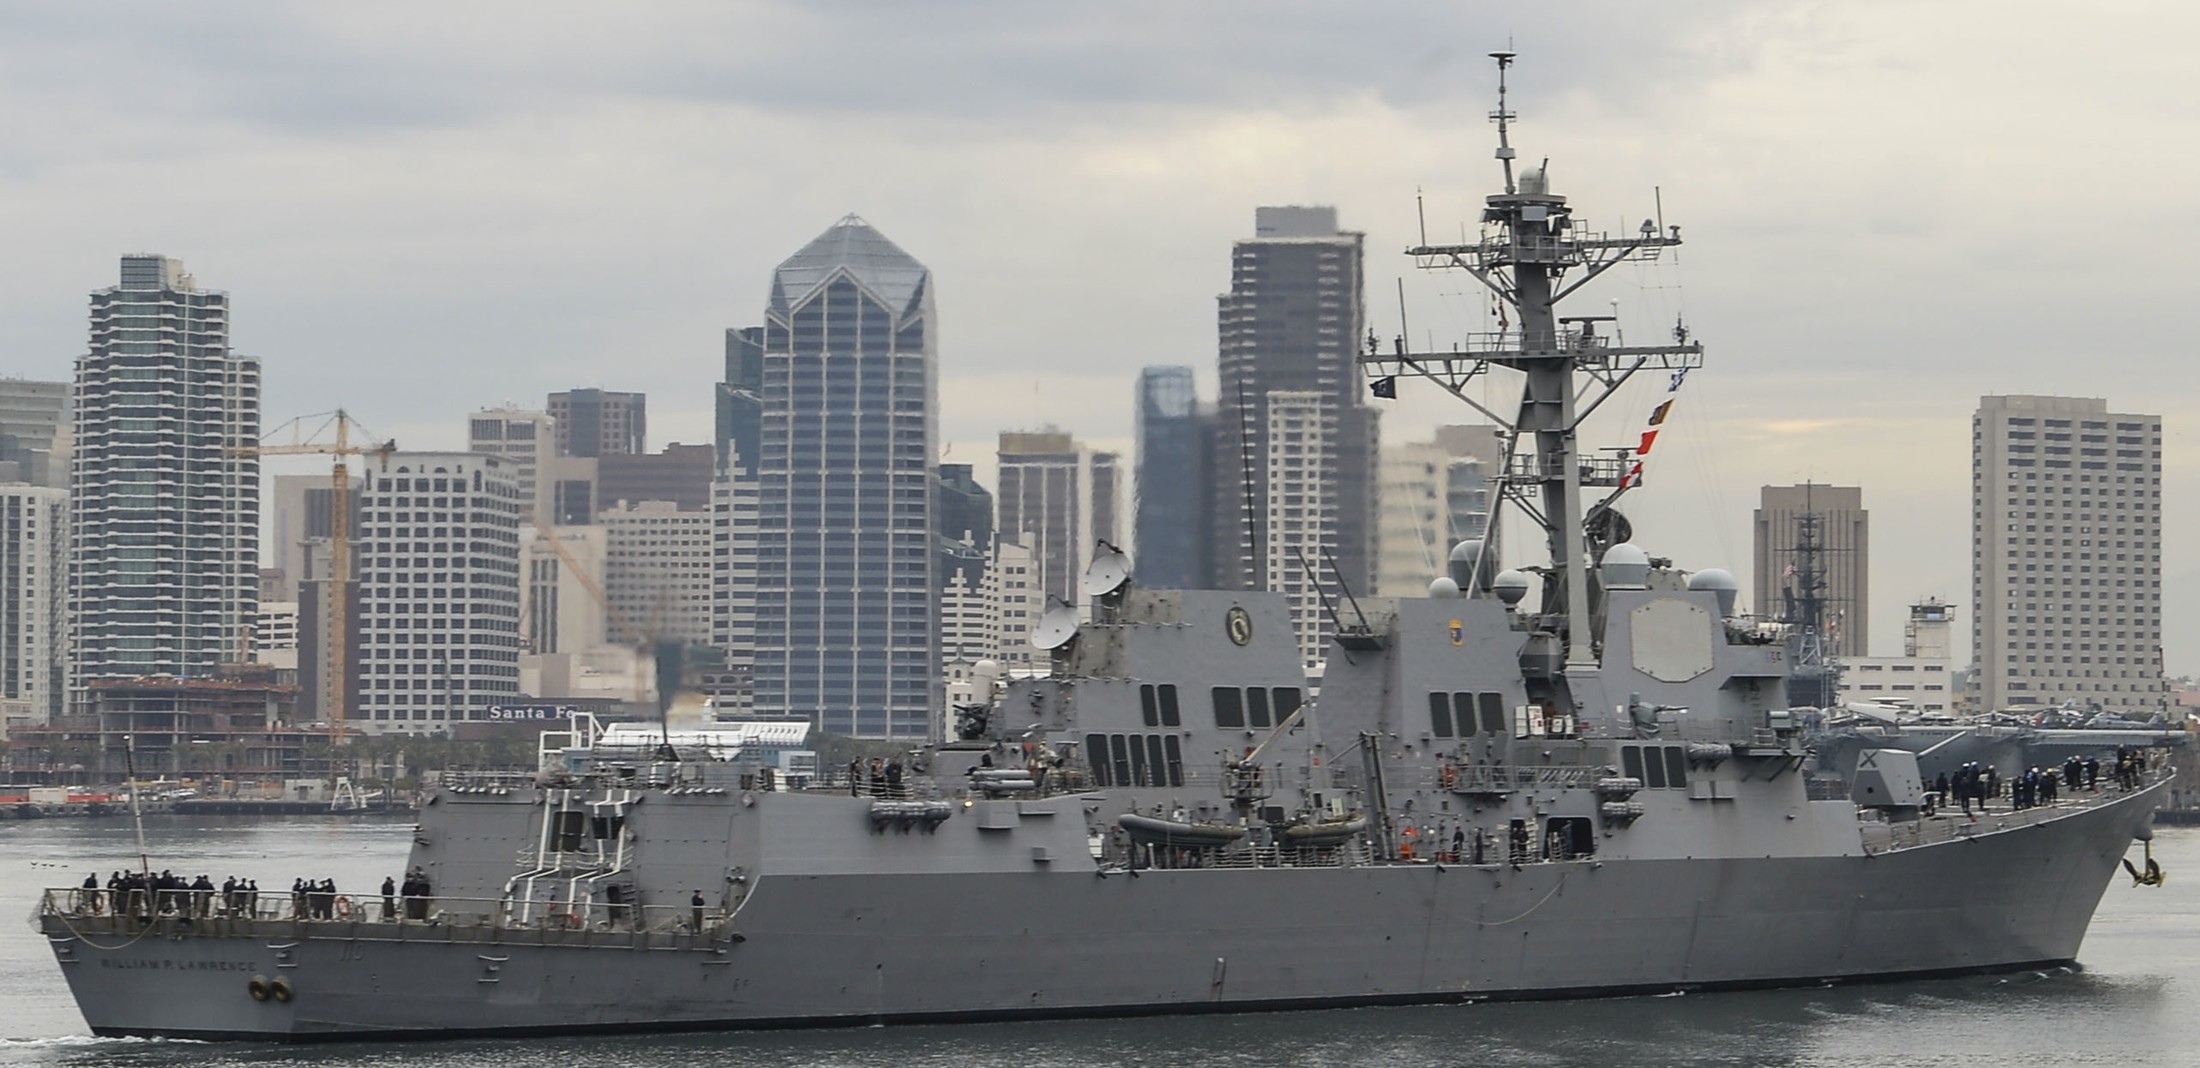 ddg-110 uss william p. lawrence arleigh burke class guided missile destroyer aegis us navy san diego 09